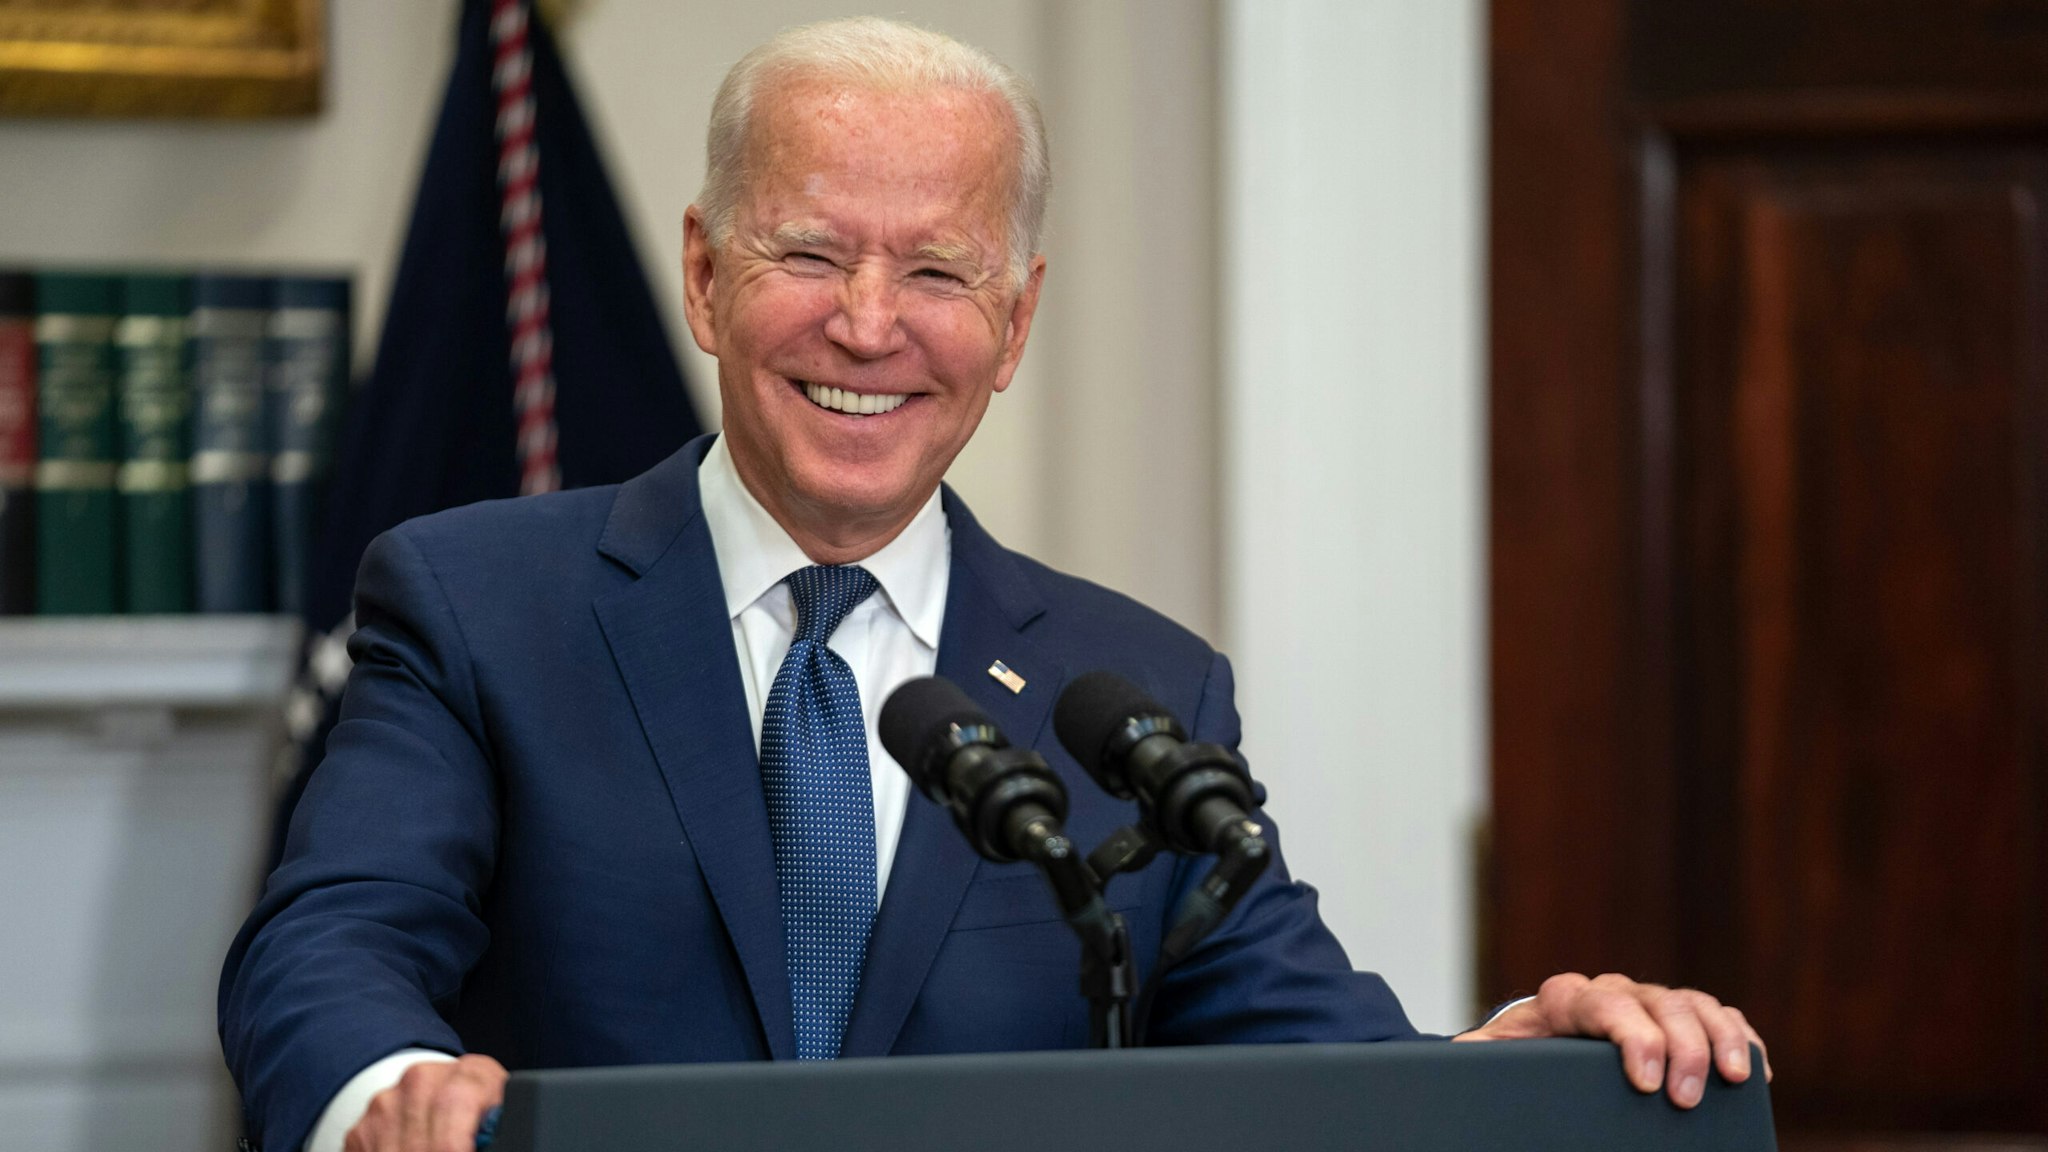 U.S. President Joe Biden smiles while speaking in the Roosevelt Room of the White House in Washington, D.C., U.S., on Sunday, Aug. 22, 2021. Biden said the U.S. has expanded its evacuation efforts beyond the perimeter of the Kabul airport, warned of possible terror attacks and acknowledged that he may be forced to push back his deadline for leaving Afghanistan.